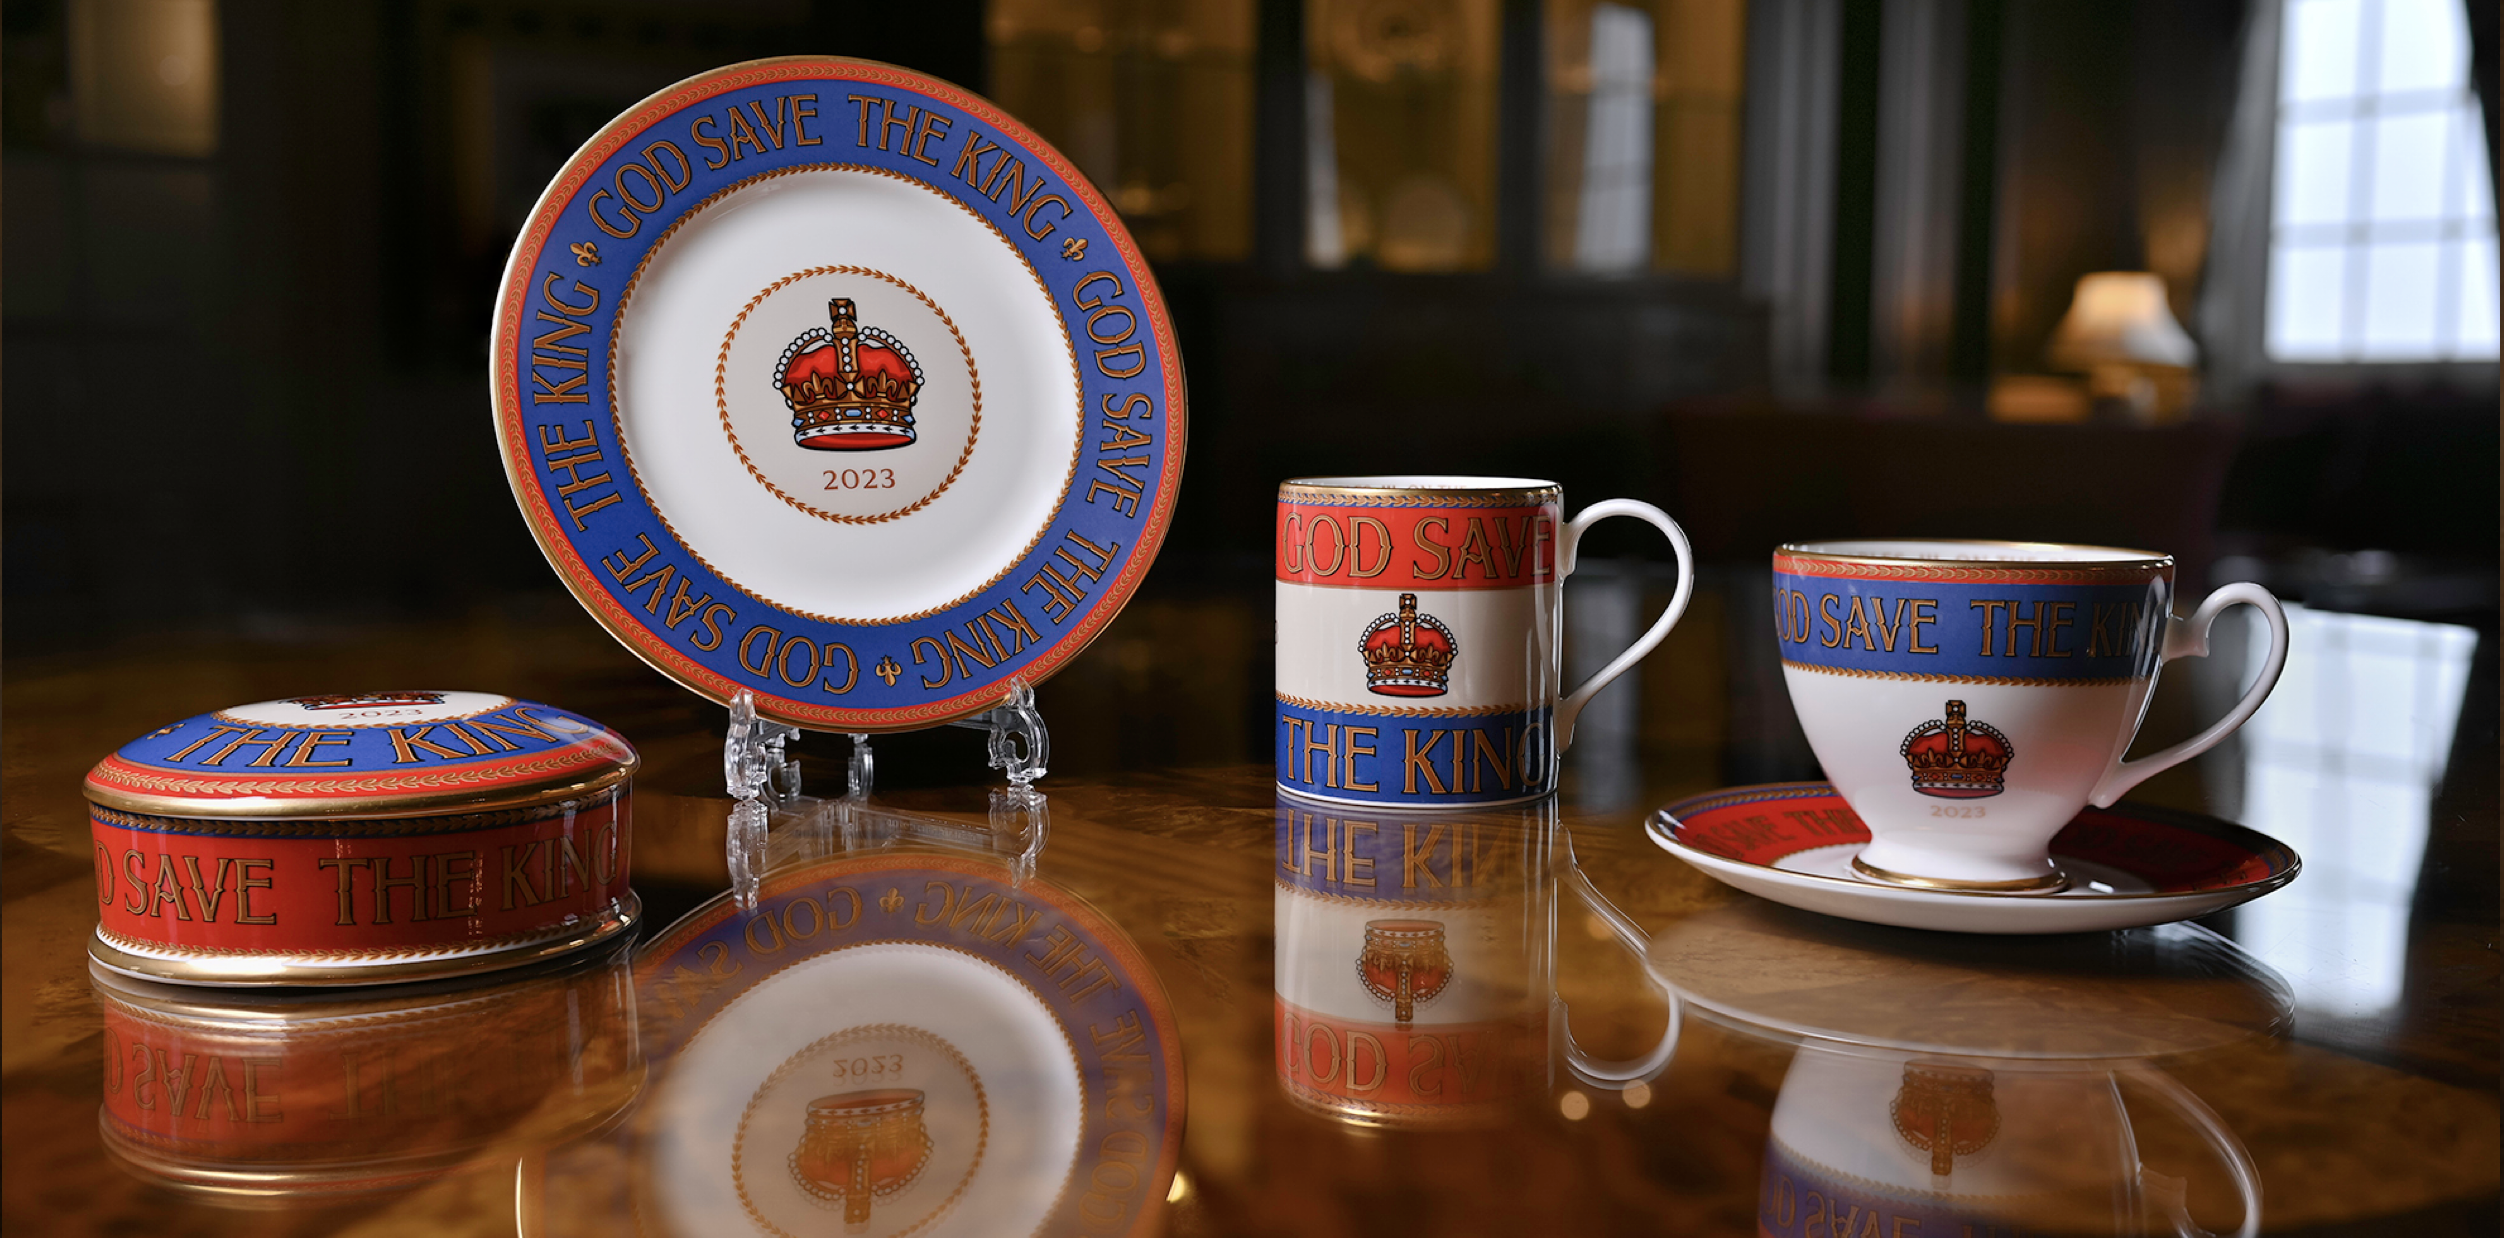 Souvenir porcelain wares by the English company Duchess China, created to mark the upcoming coronation of King Charles III. Image courtesy of Duchess China 